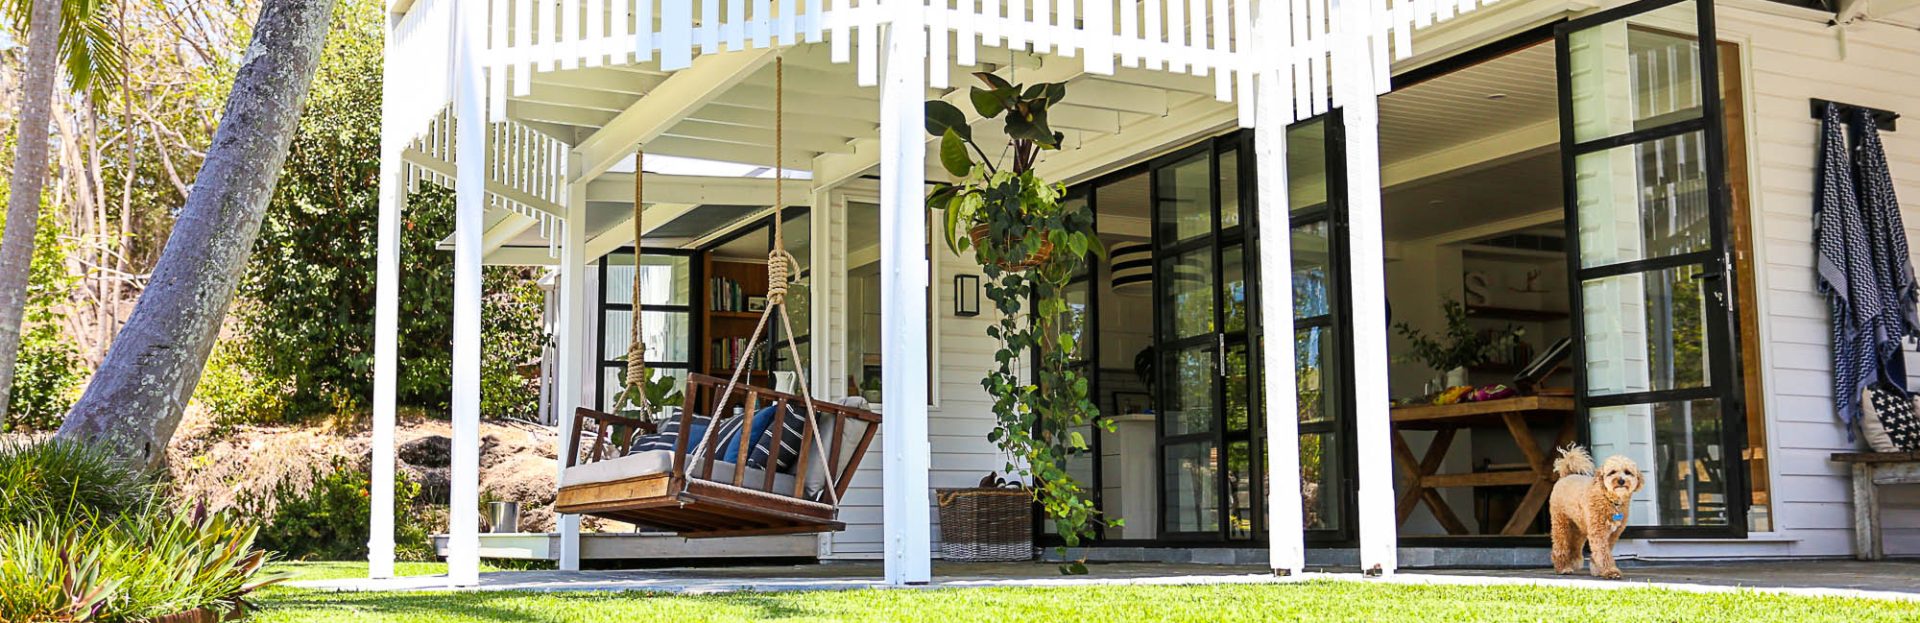 Dreamy Renovated Queenslander: What Catherine learned while renovating with kids